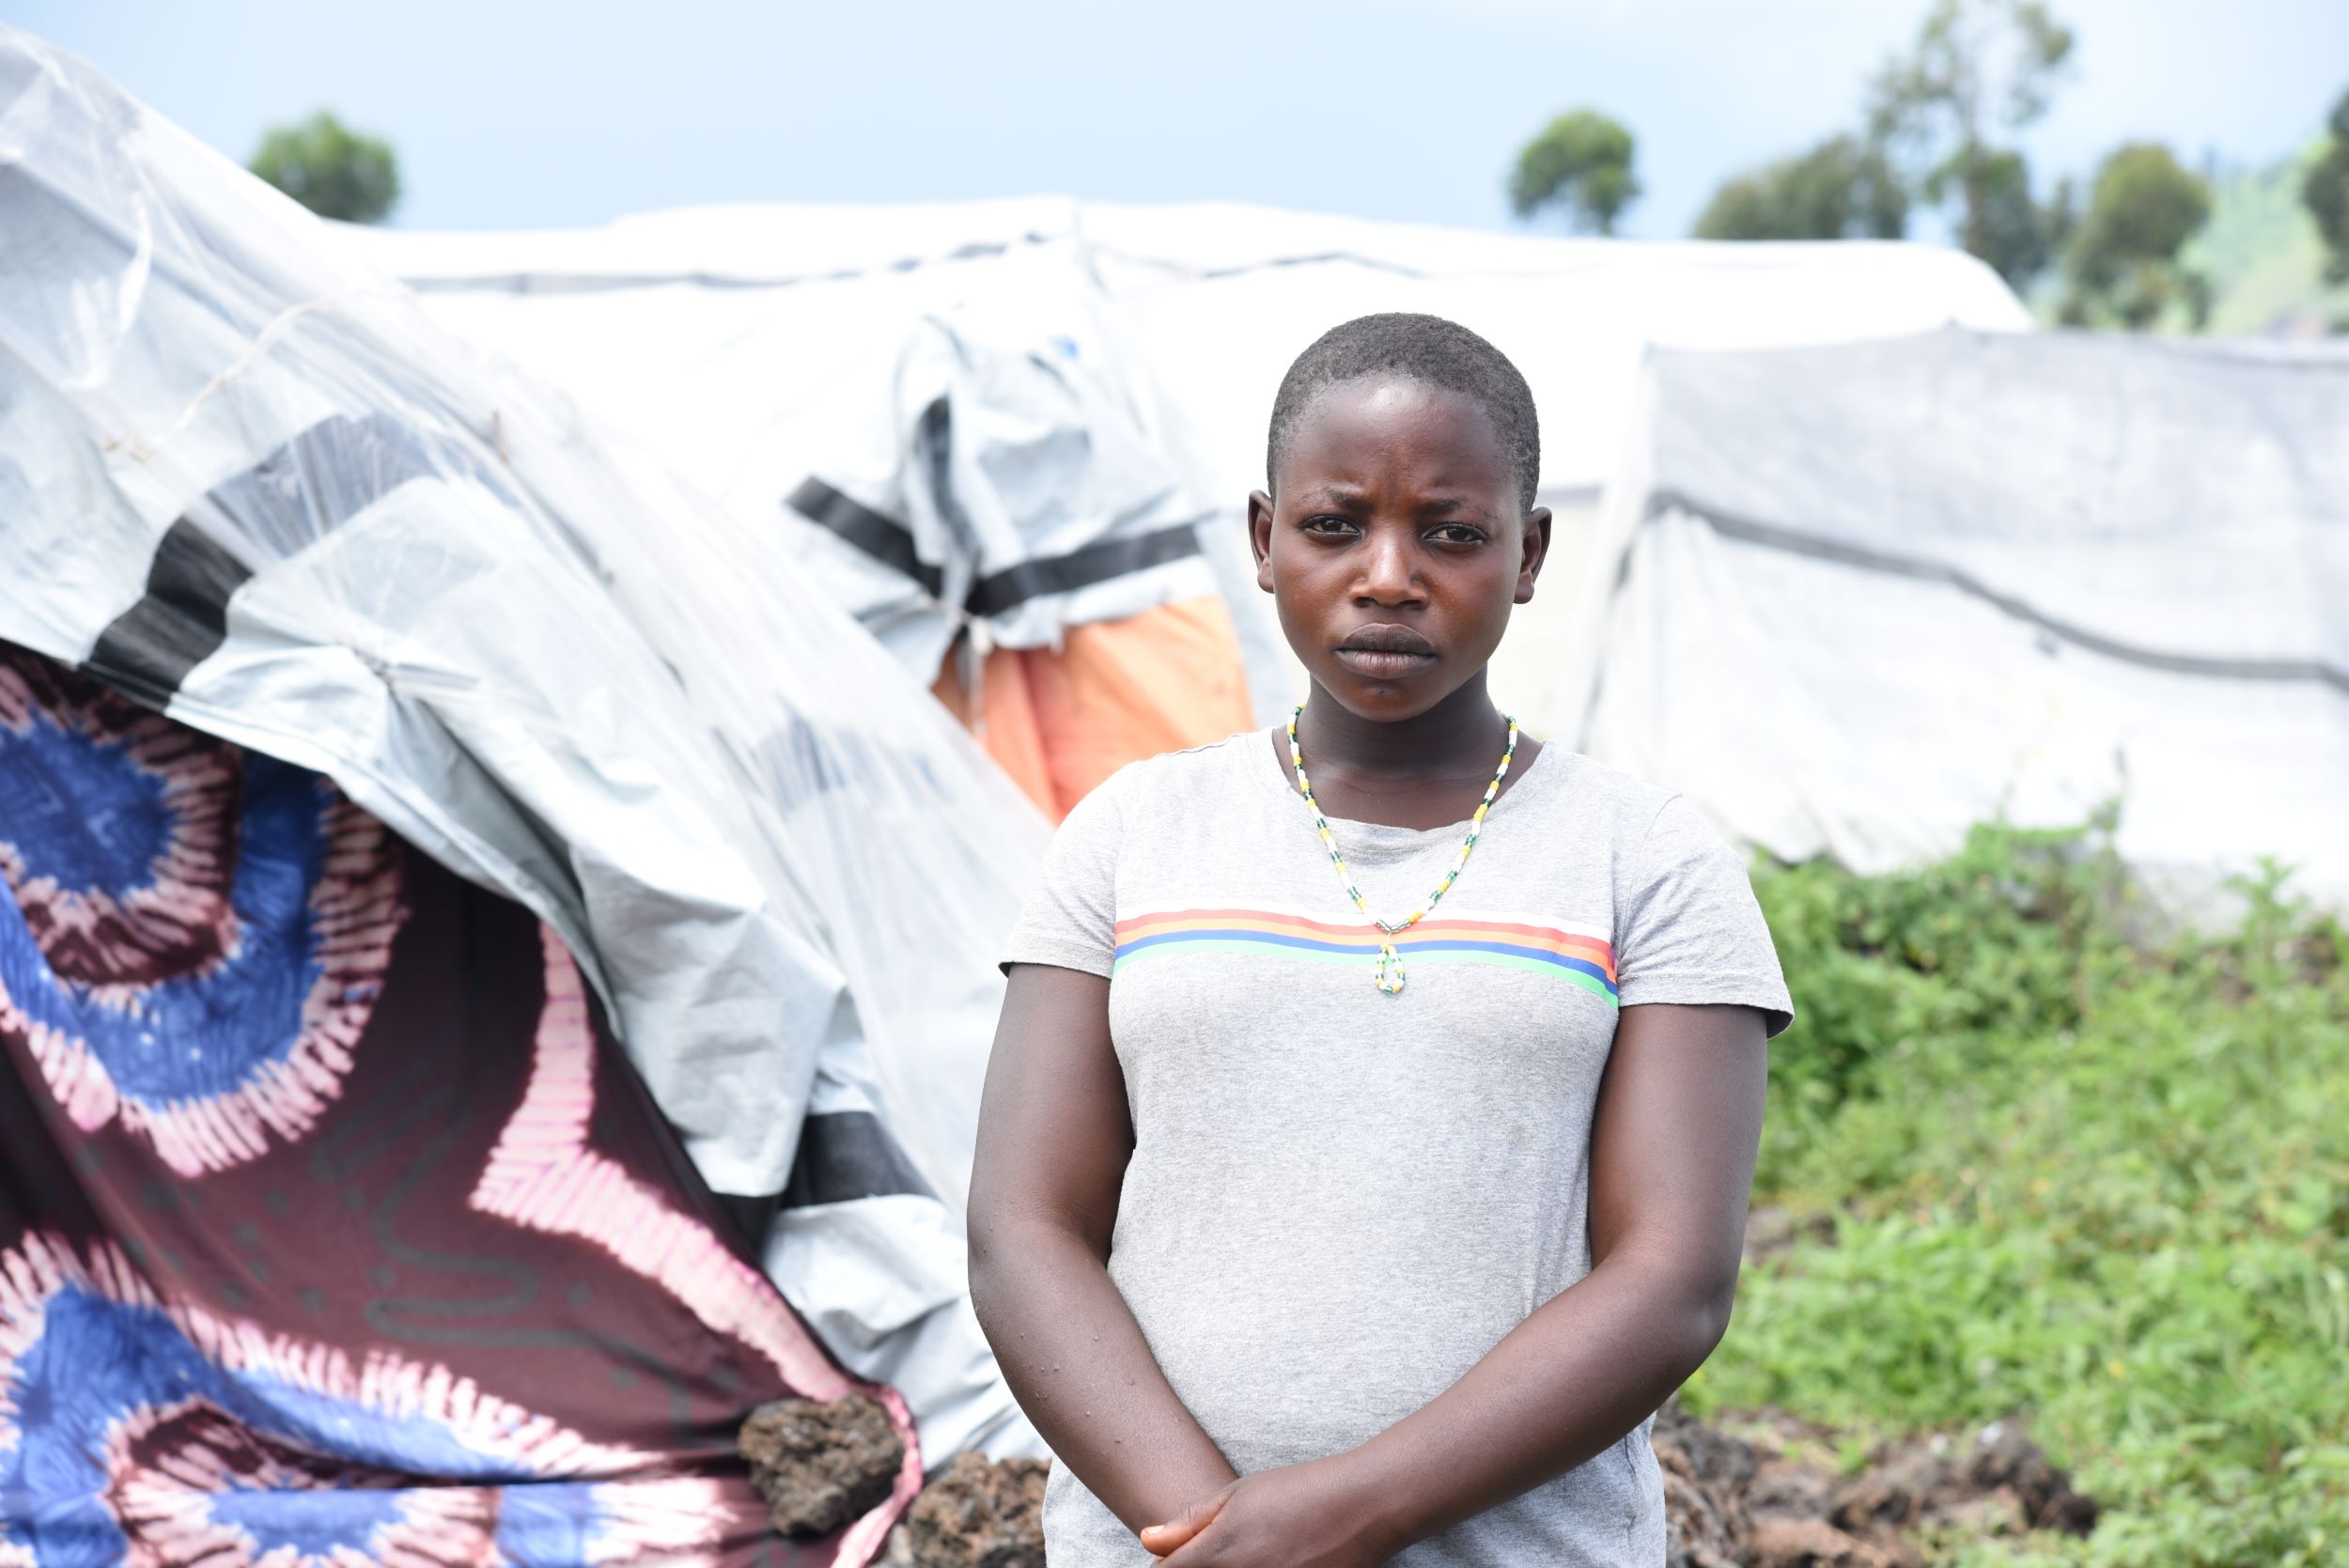 A young girl from the Democratic Republic of Congo looks thoughtful in a white t-shirt, standing in front of a  displacement camp tent